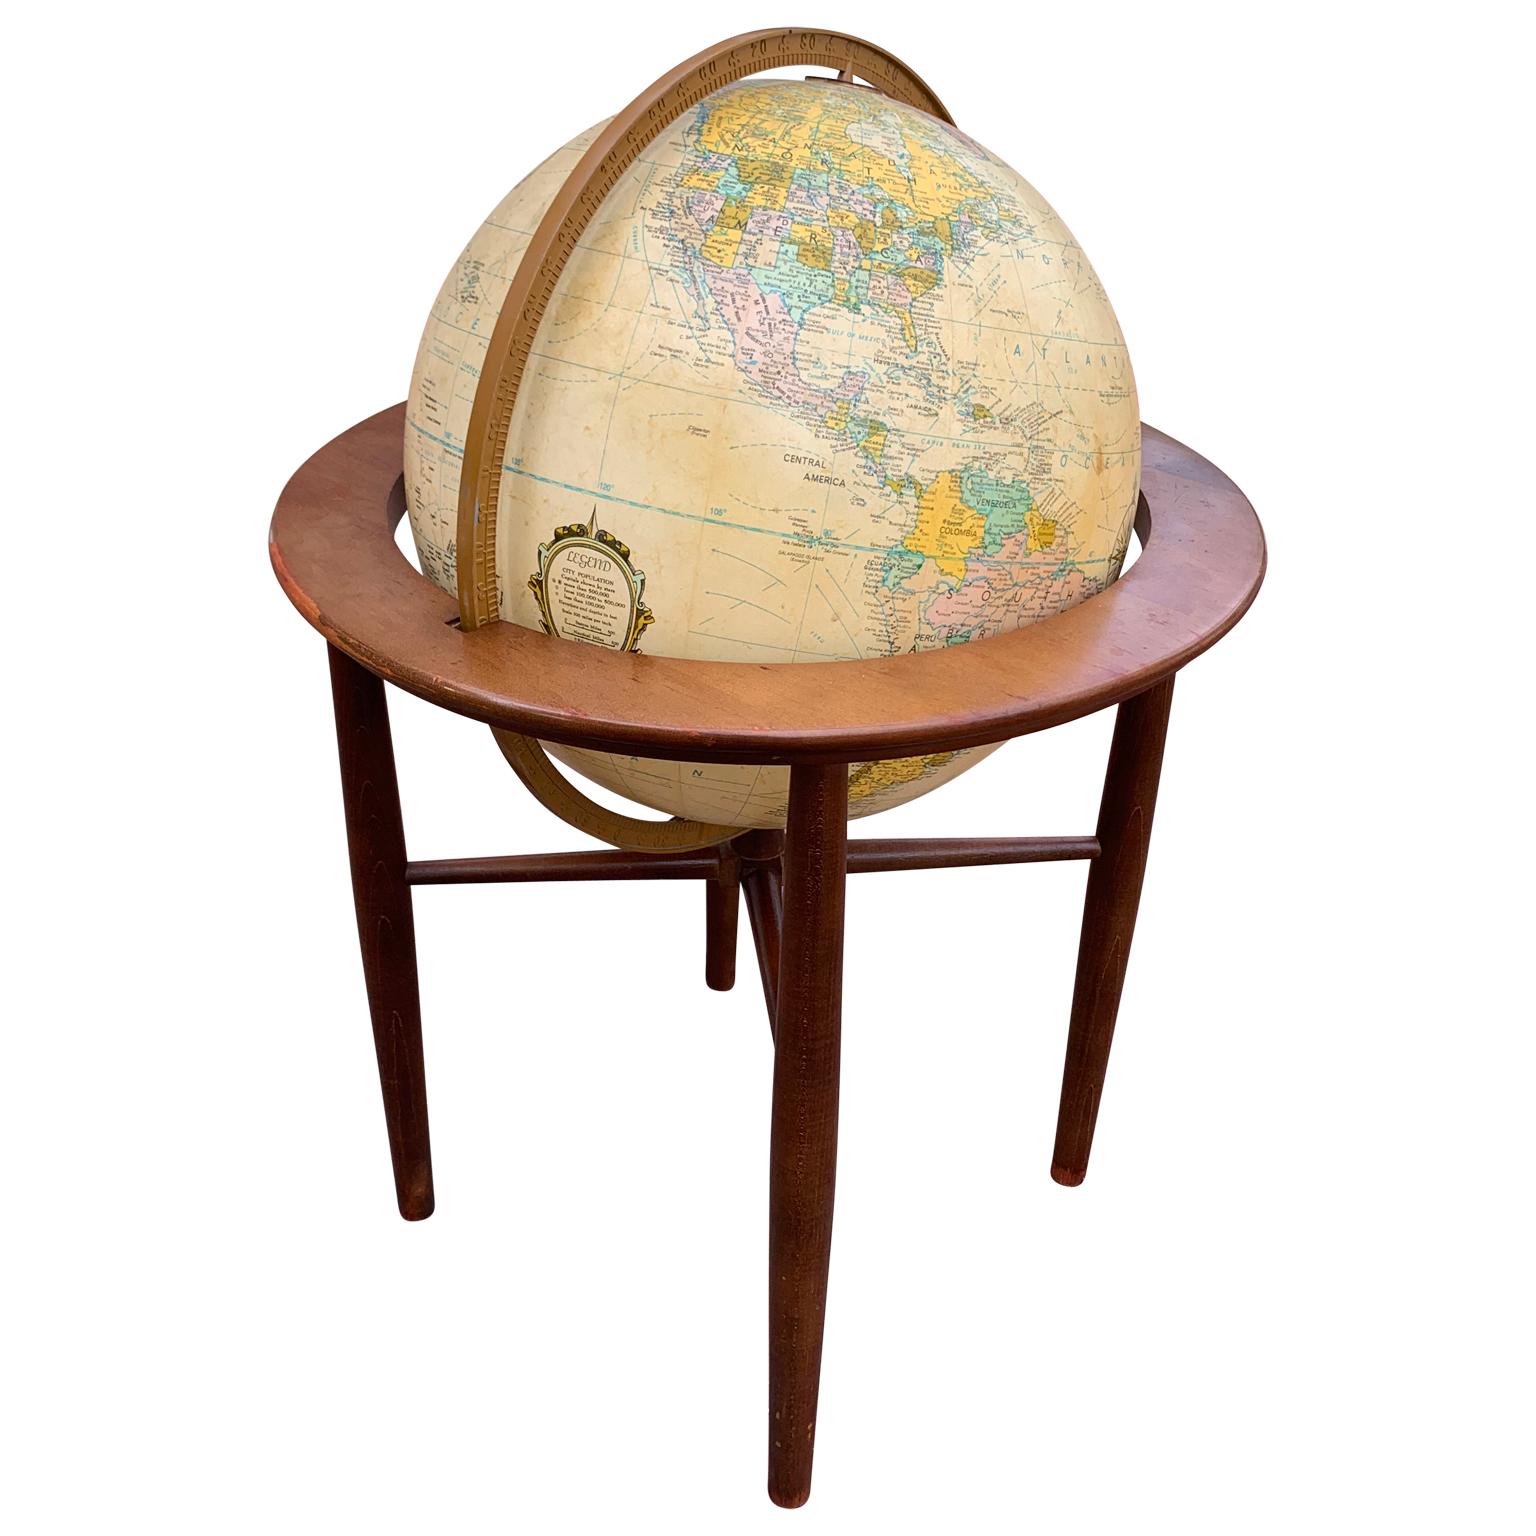 Vintage midcentury illuminated floor globe by Replogle Globes Inc.
The globe is made in the USA and Leroy M. Tolman was the cartographer.